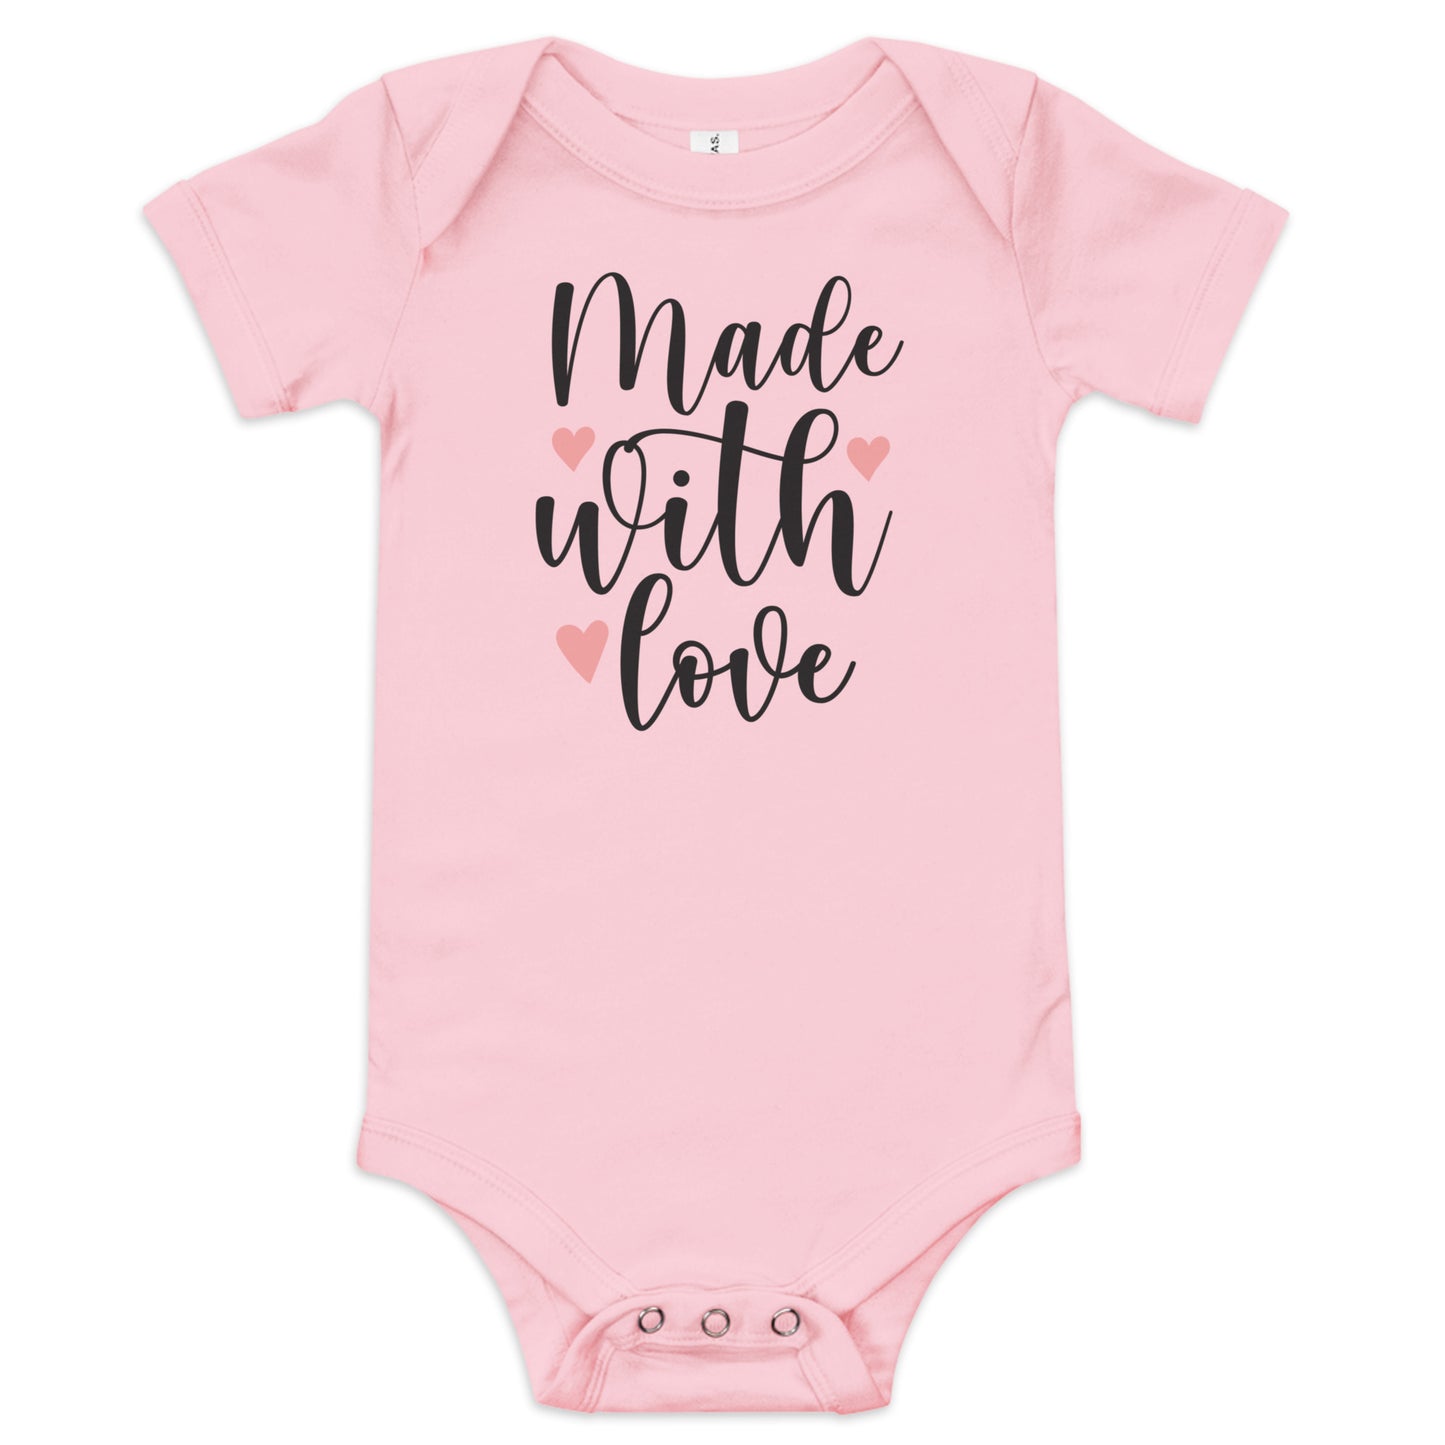 Baby short sleeve one piece - Made With Love